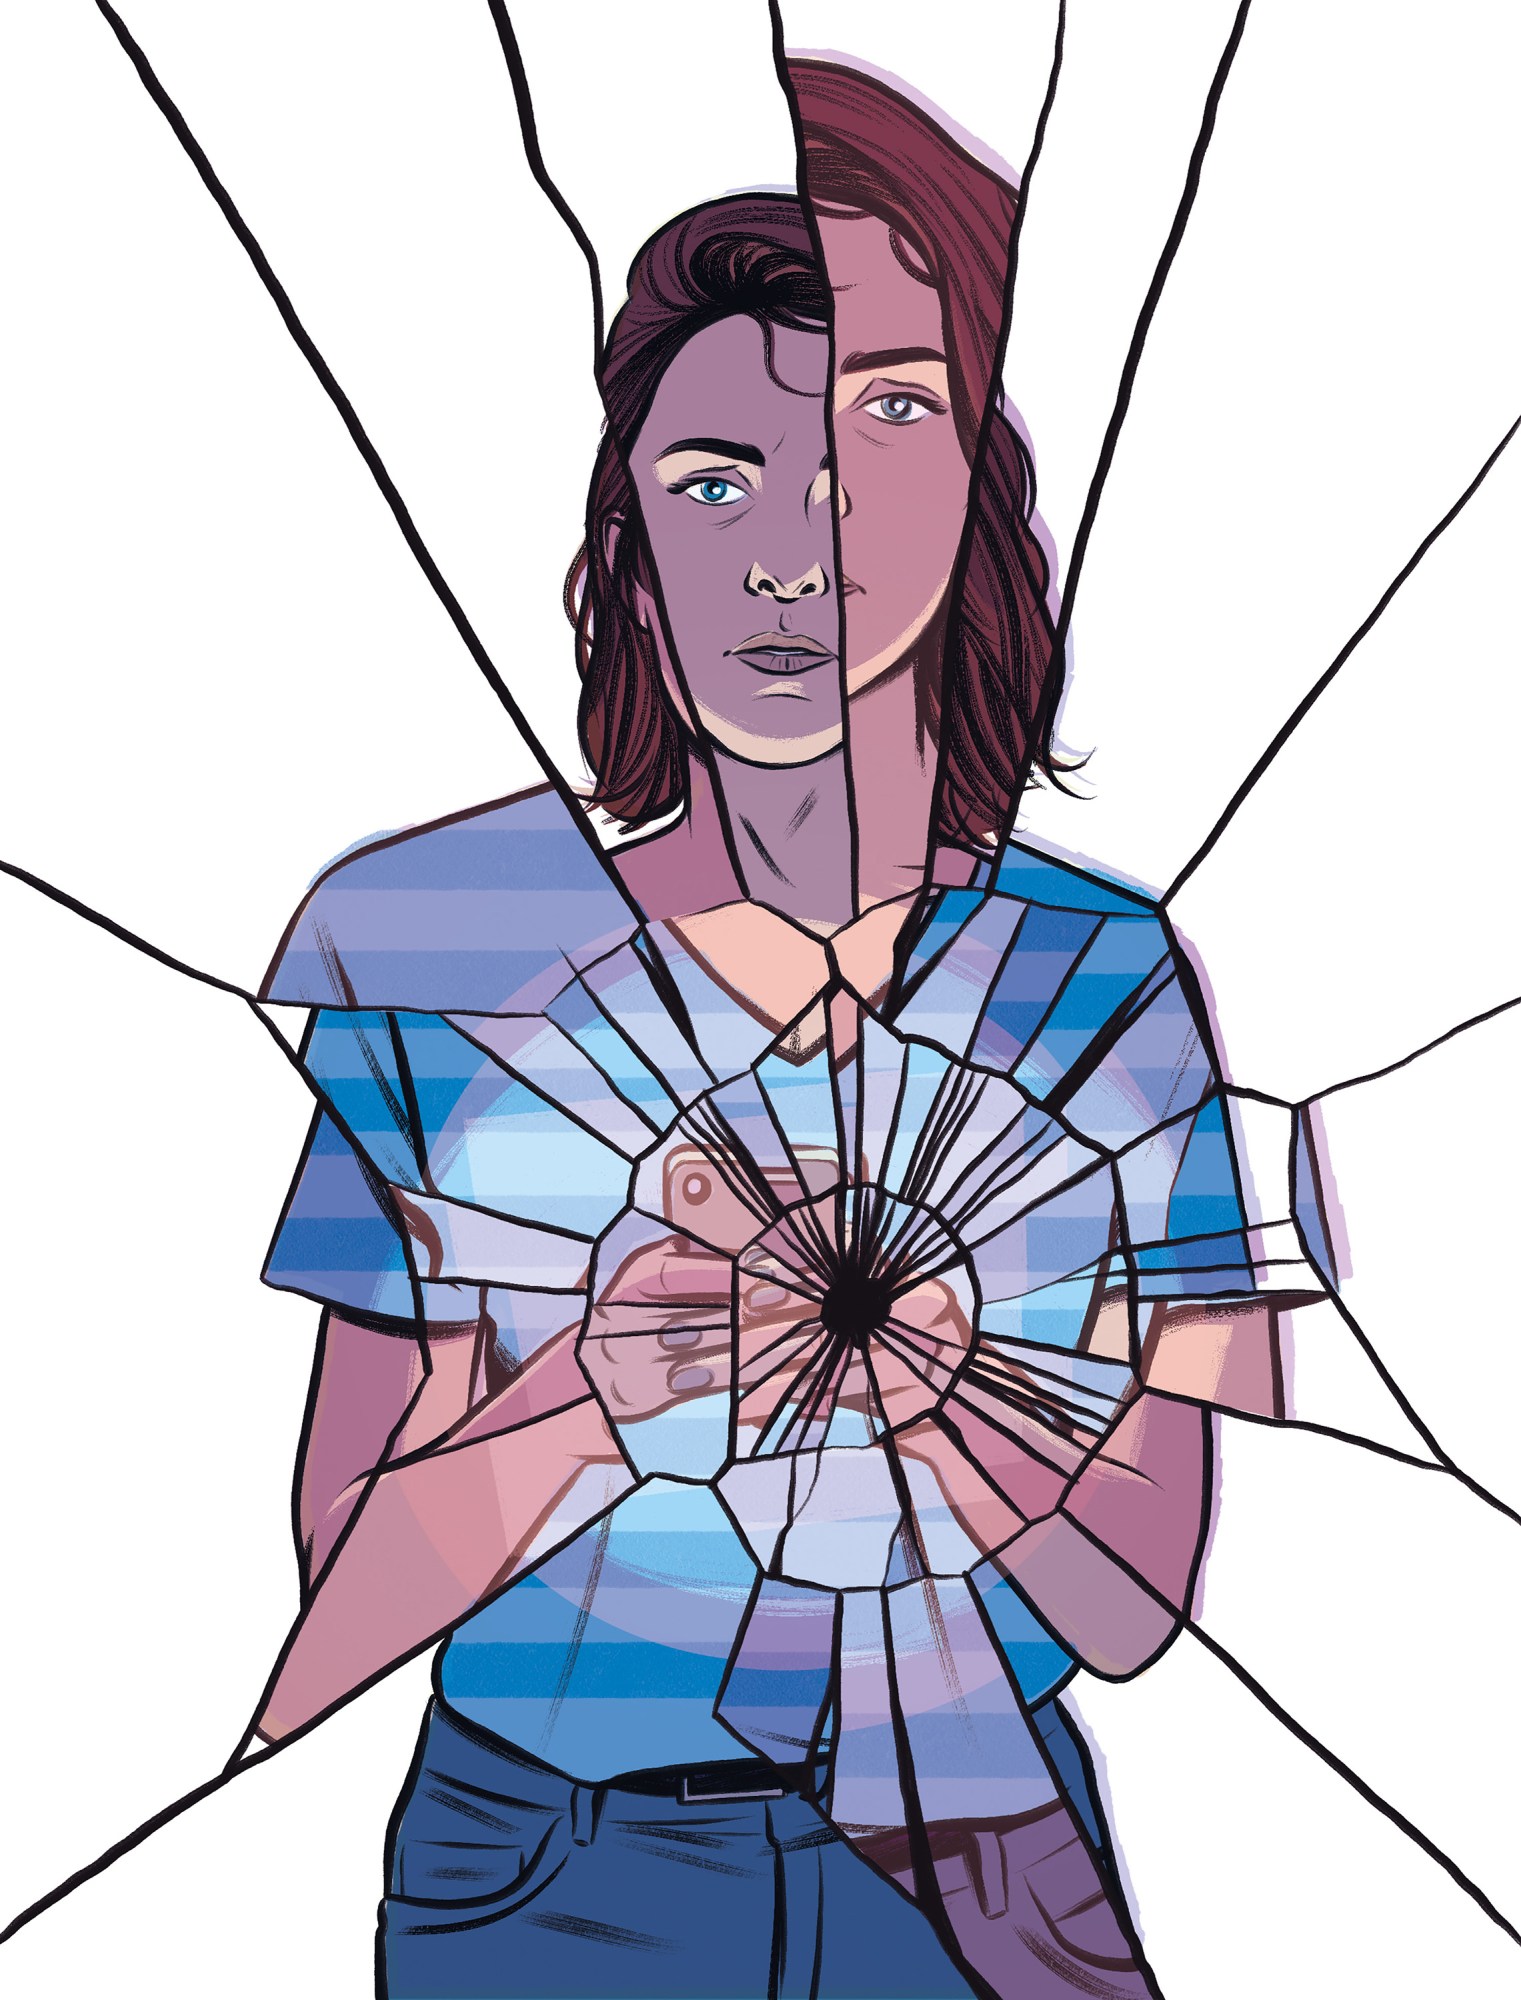 girl holding a cell phone seen in a cracked glass